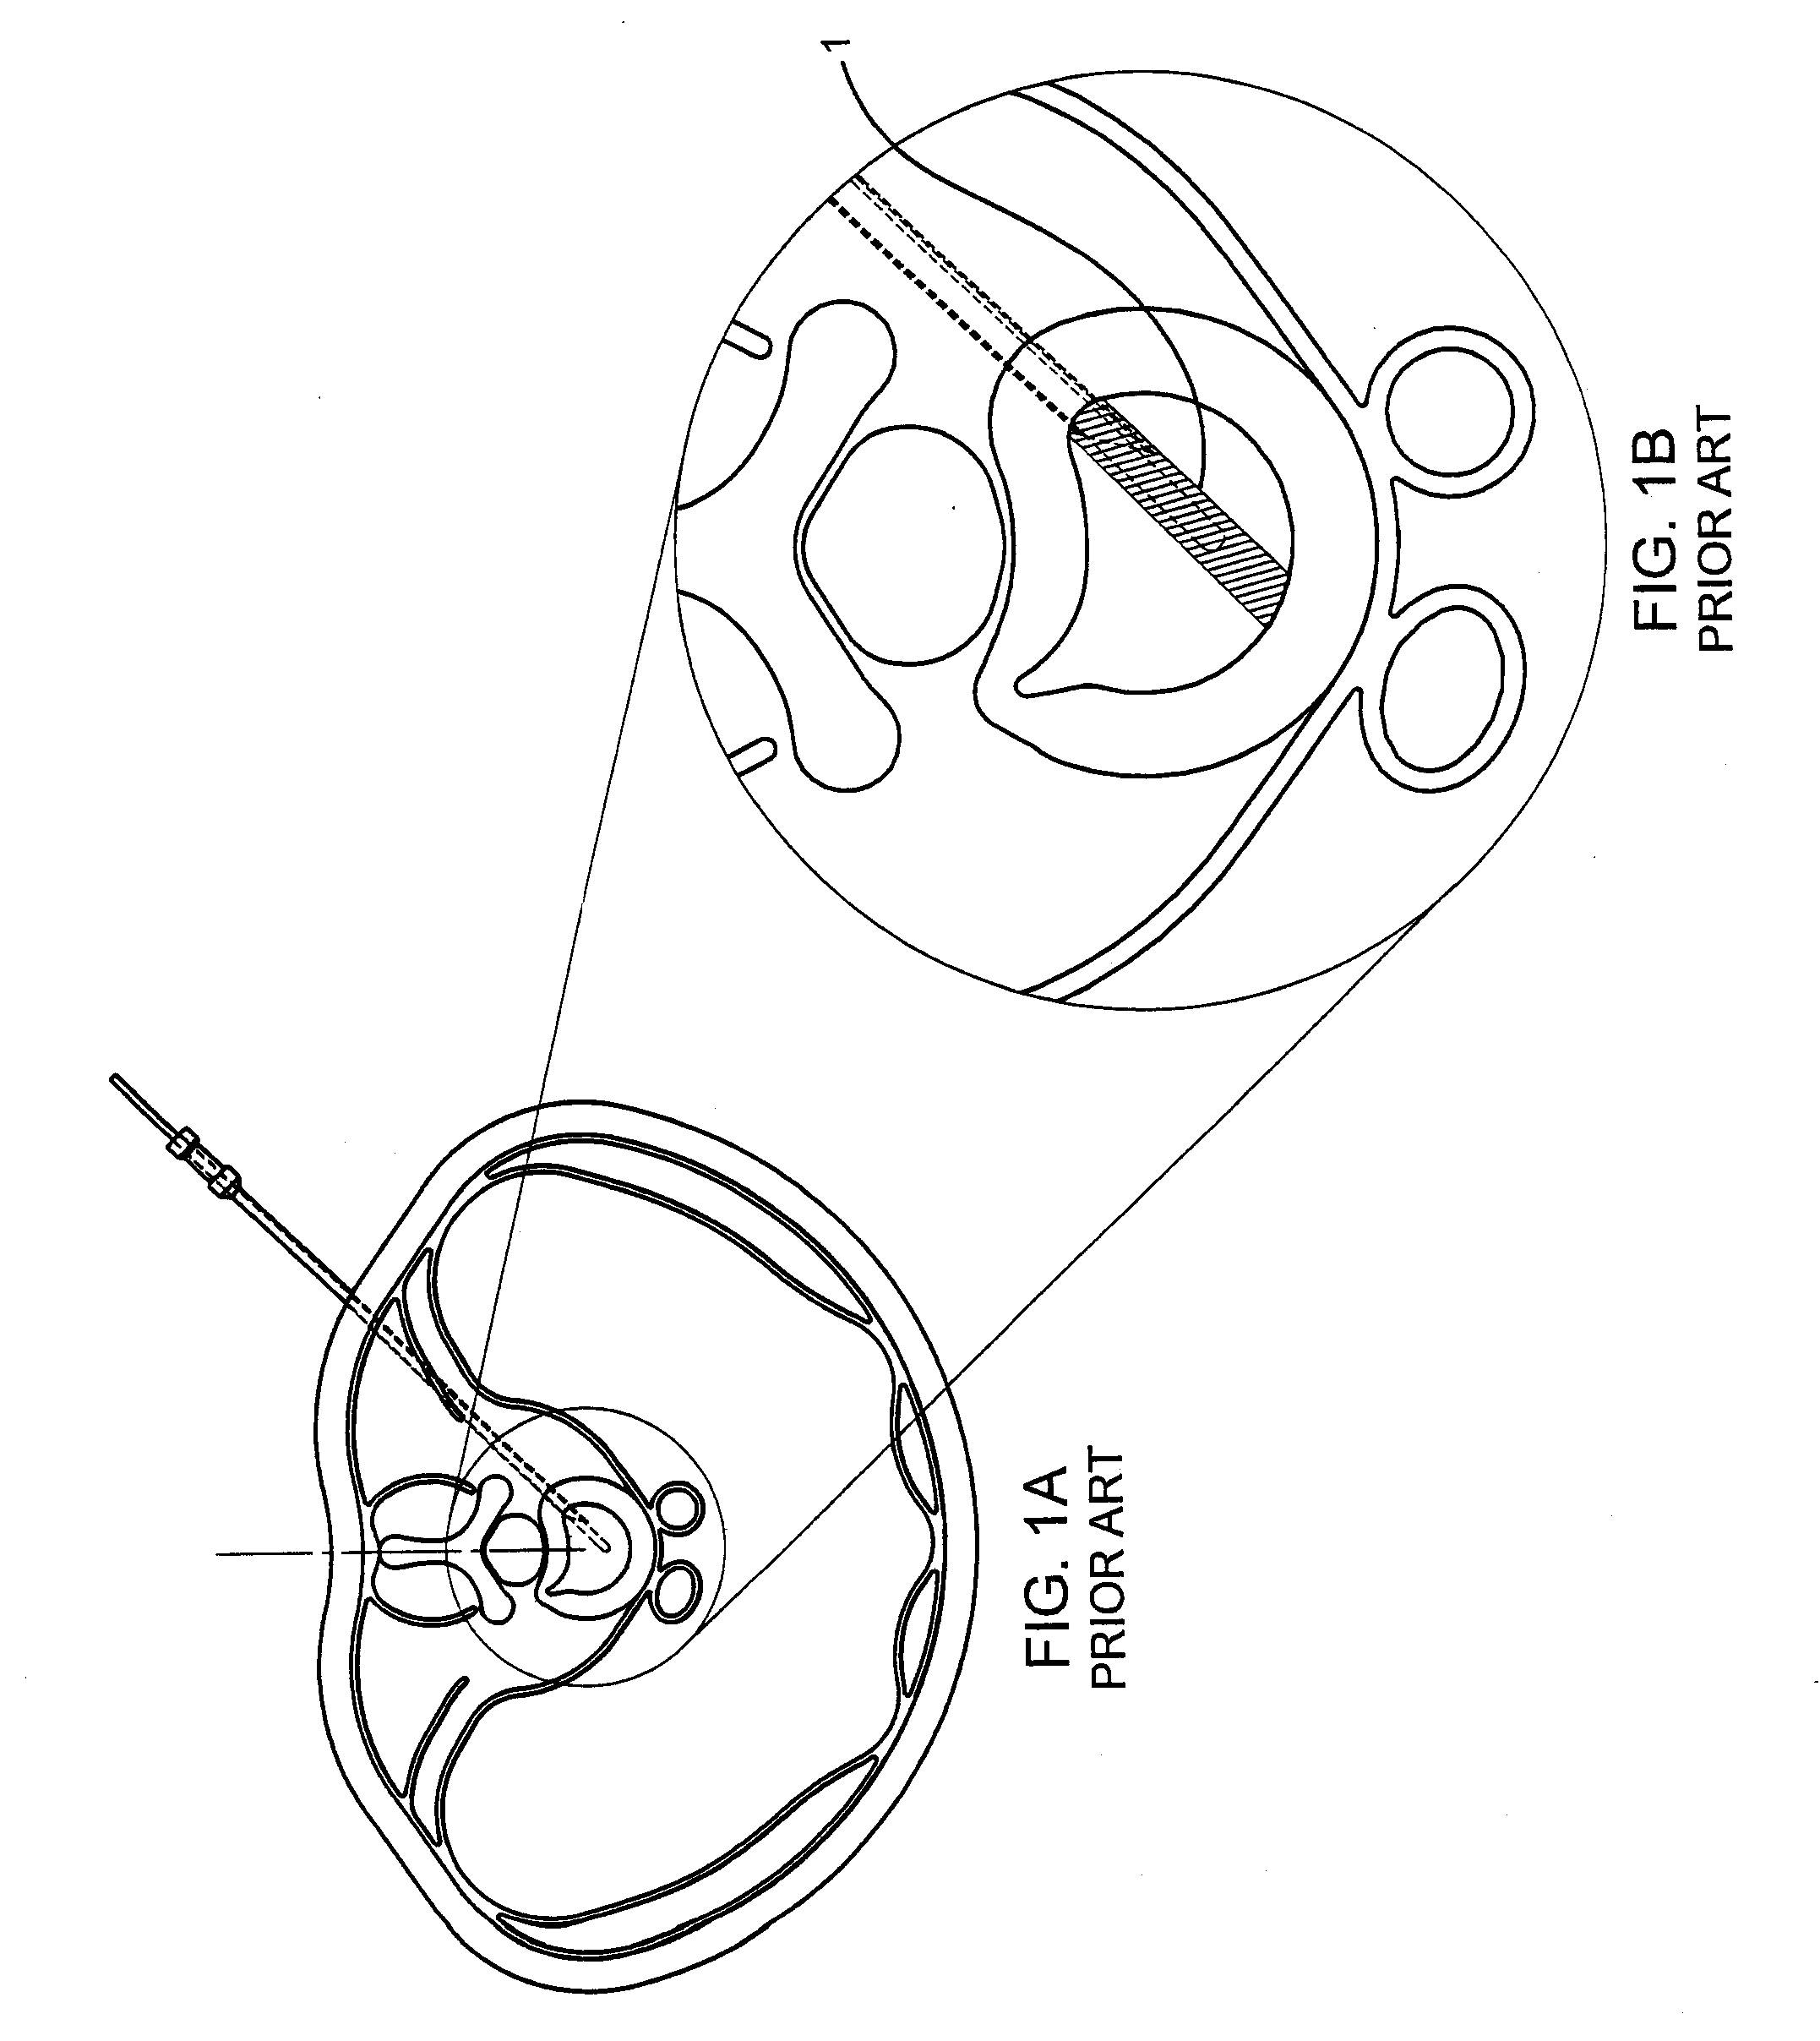 Contralateral insertion method to treat herniation with device using visualization components